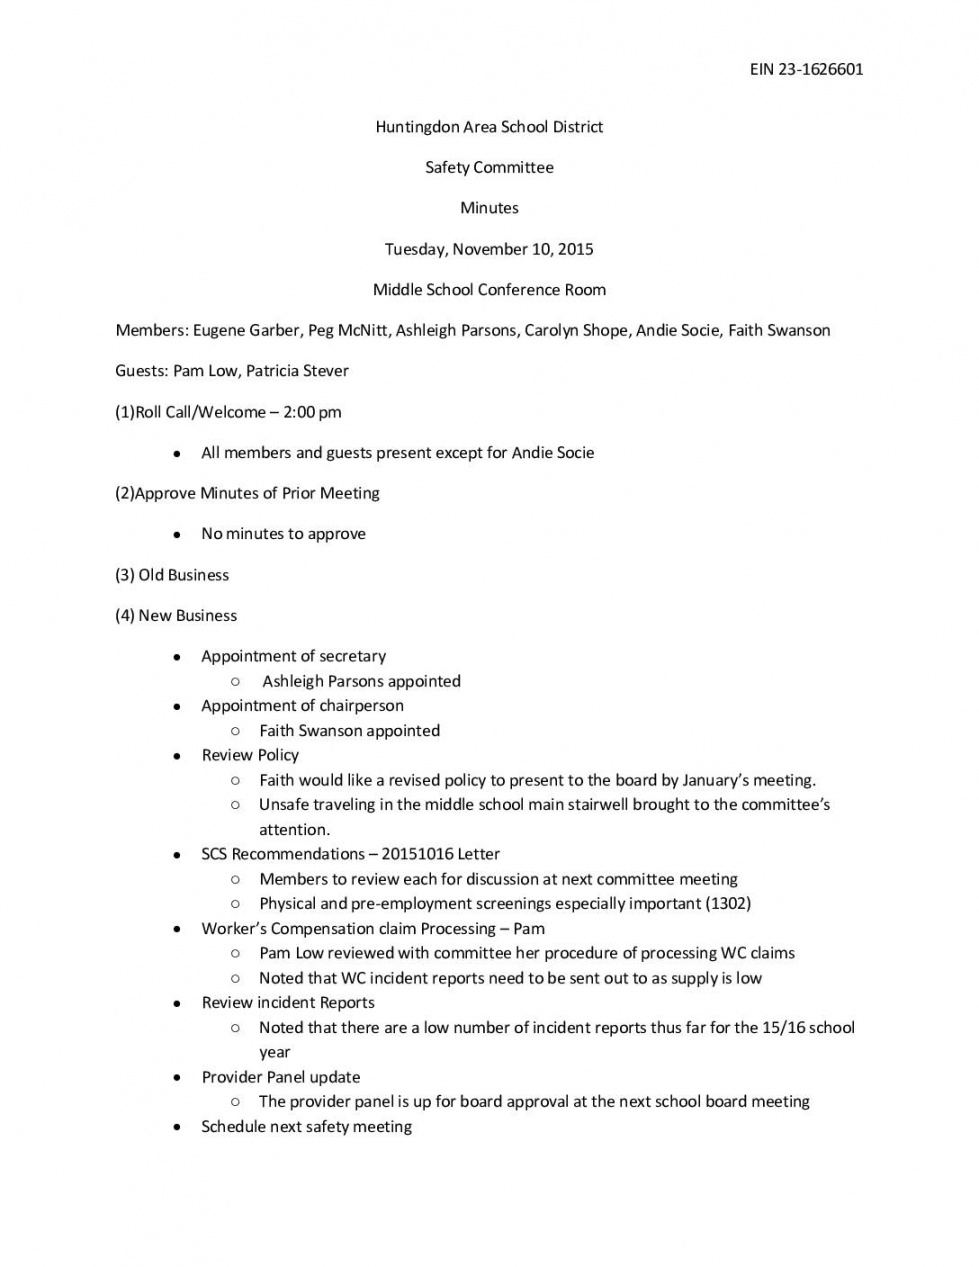 printable 20151110 safety committee minutes  huntingdon area school health and safety committee meeting agenda doc